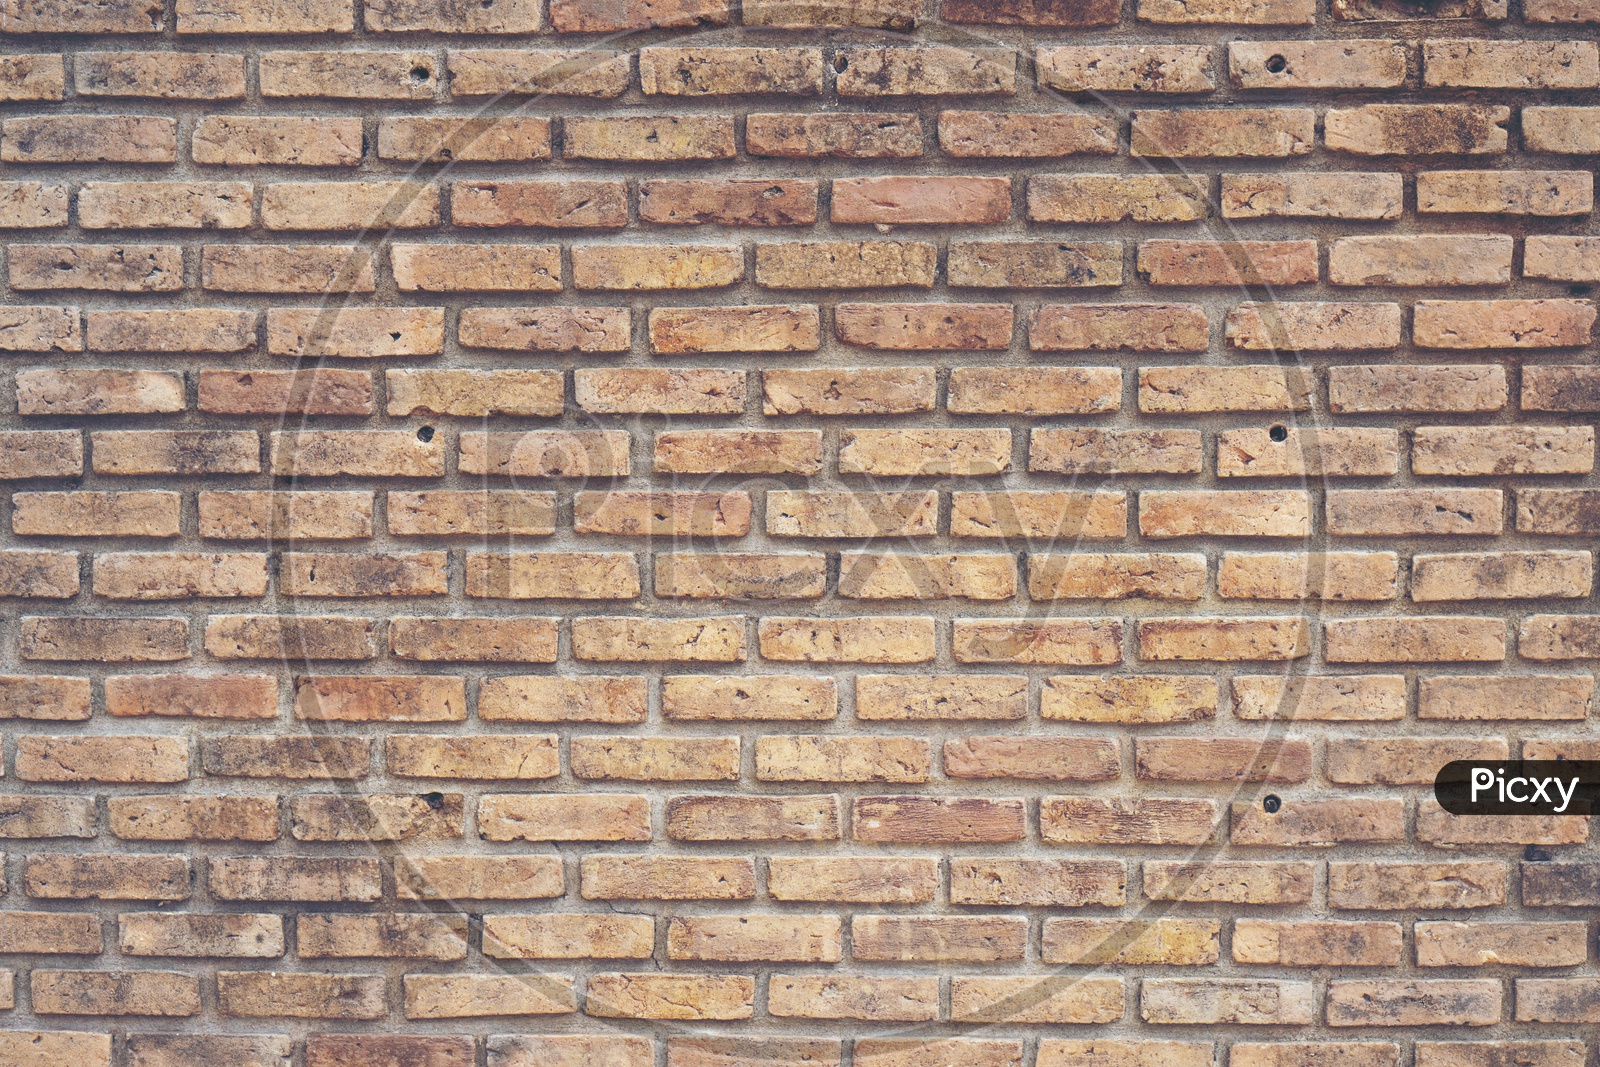 Texture and Patterns Of a Old Brick Wall